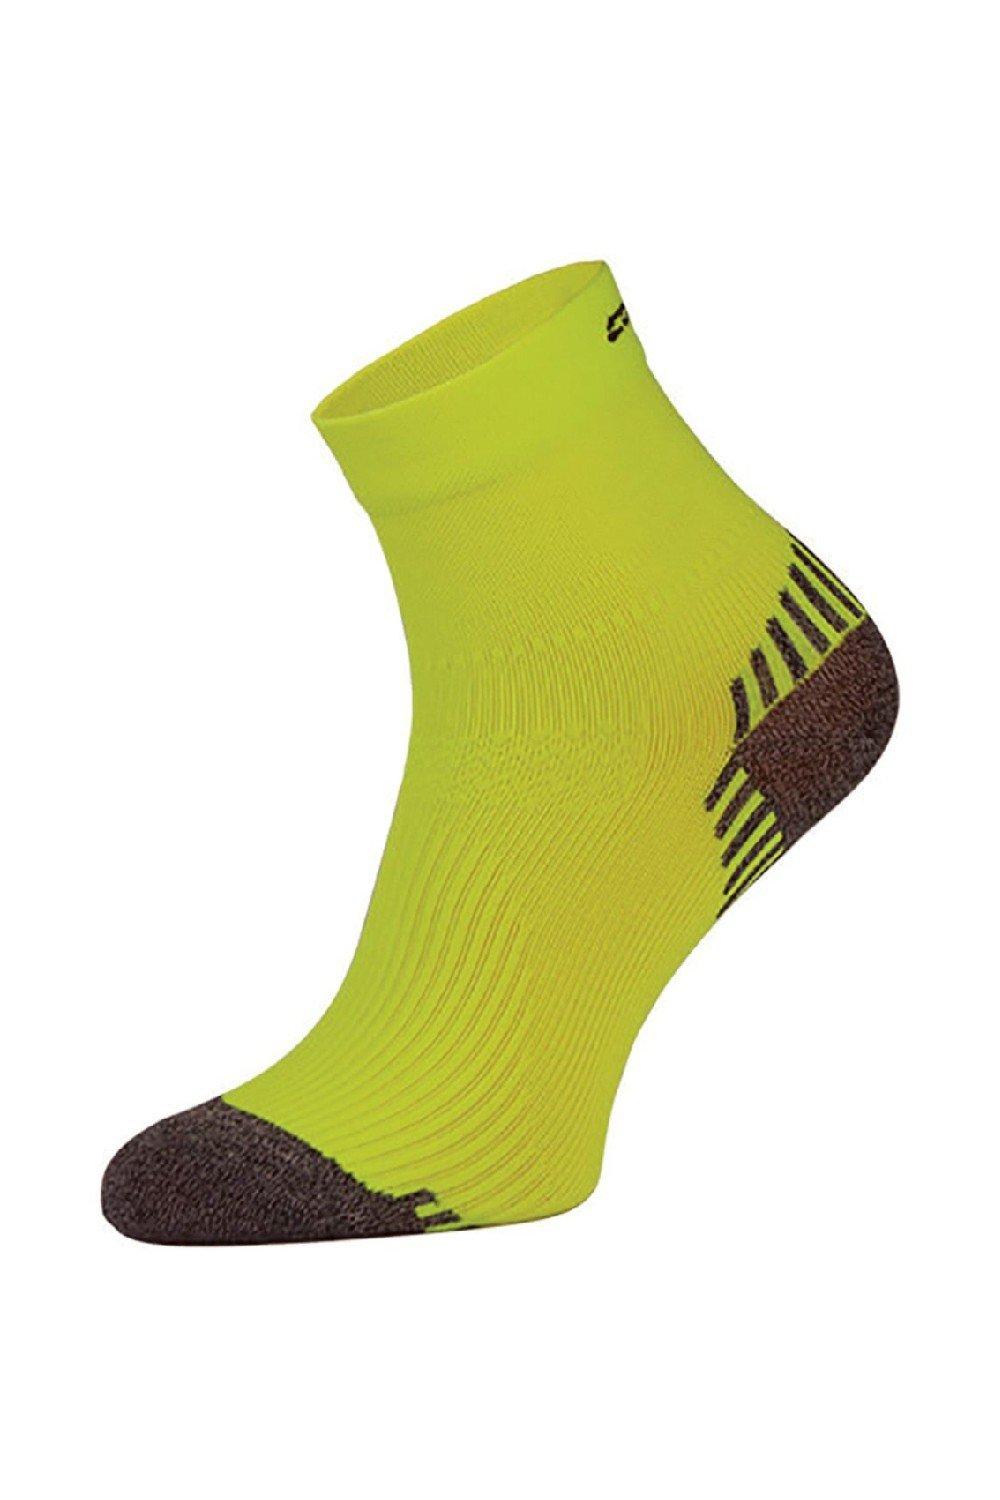 Low Cut Ankle Length Compression Running Socks